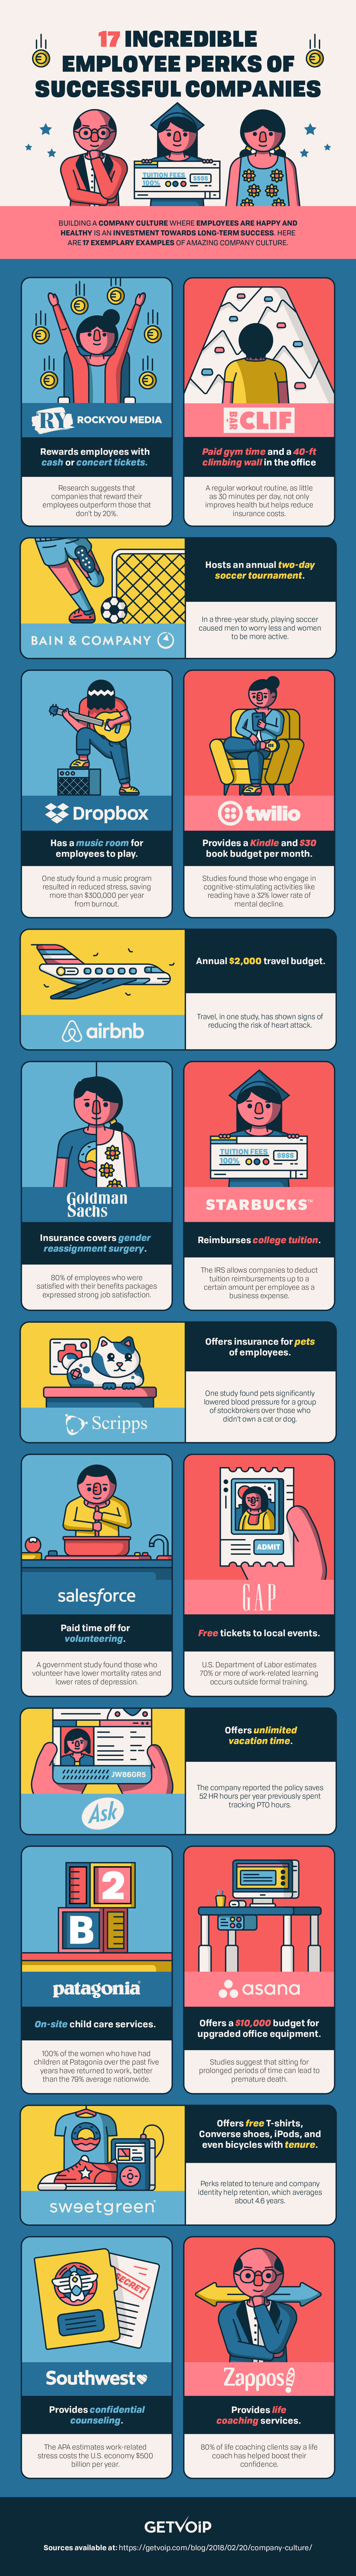 It’s the Small Things That Make a Difference: Amazing Employee Perk Ideas of Successful Companies - Infographic